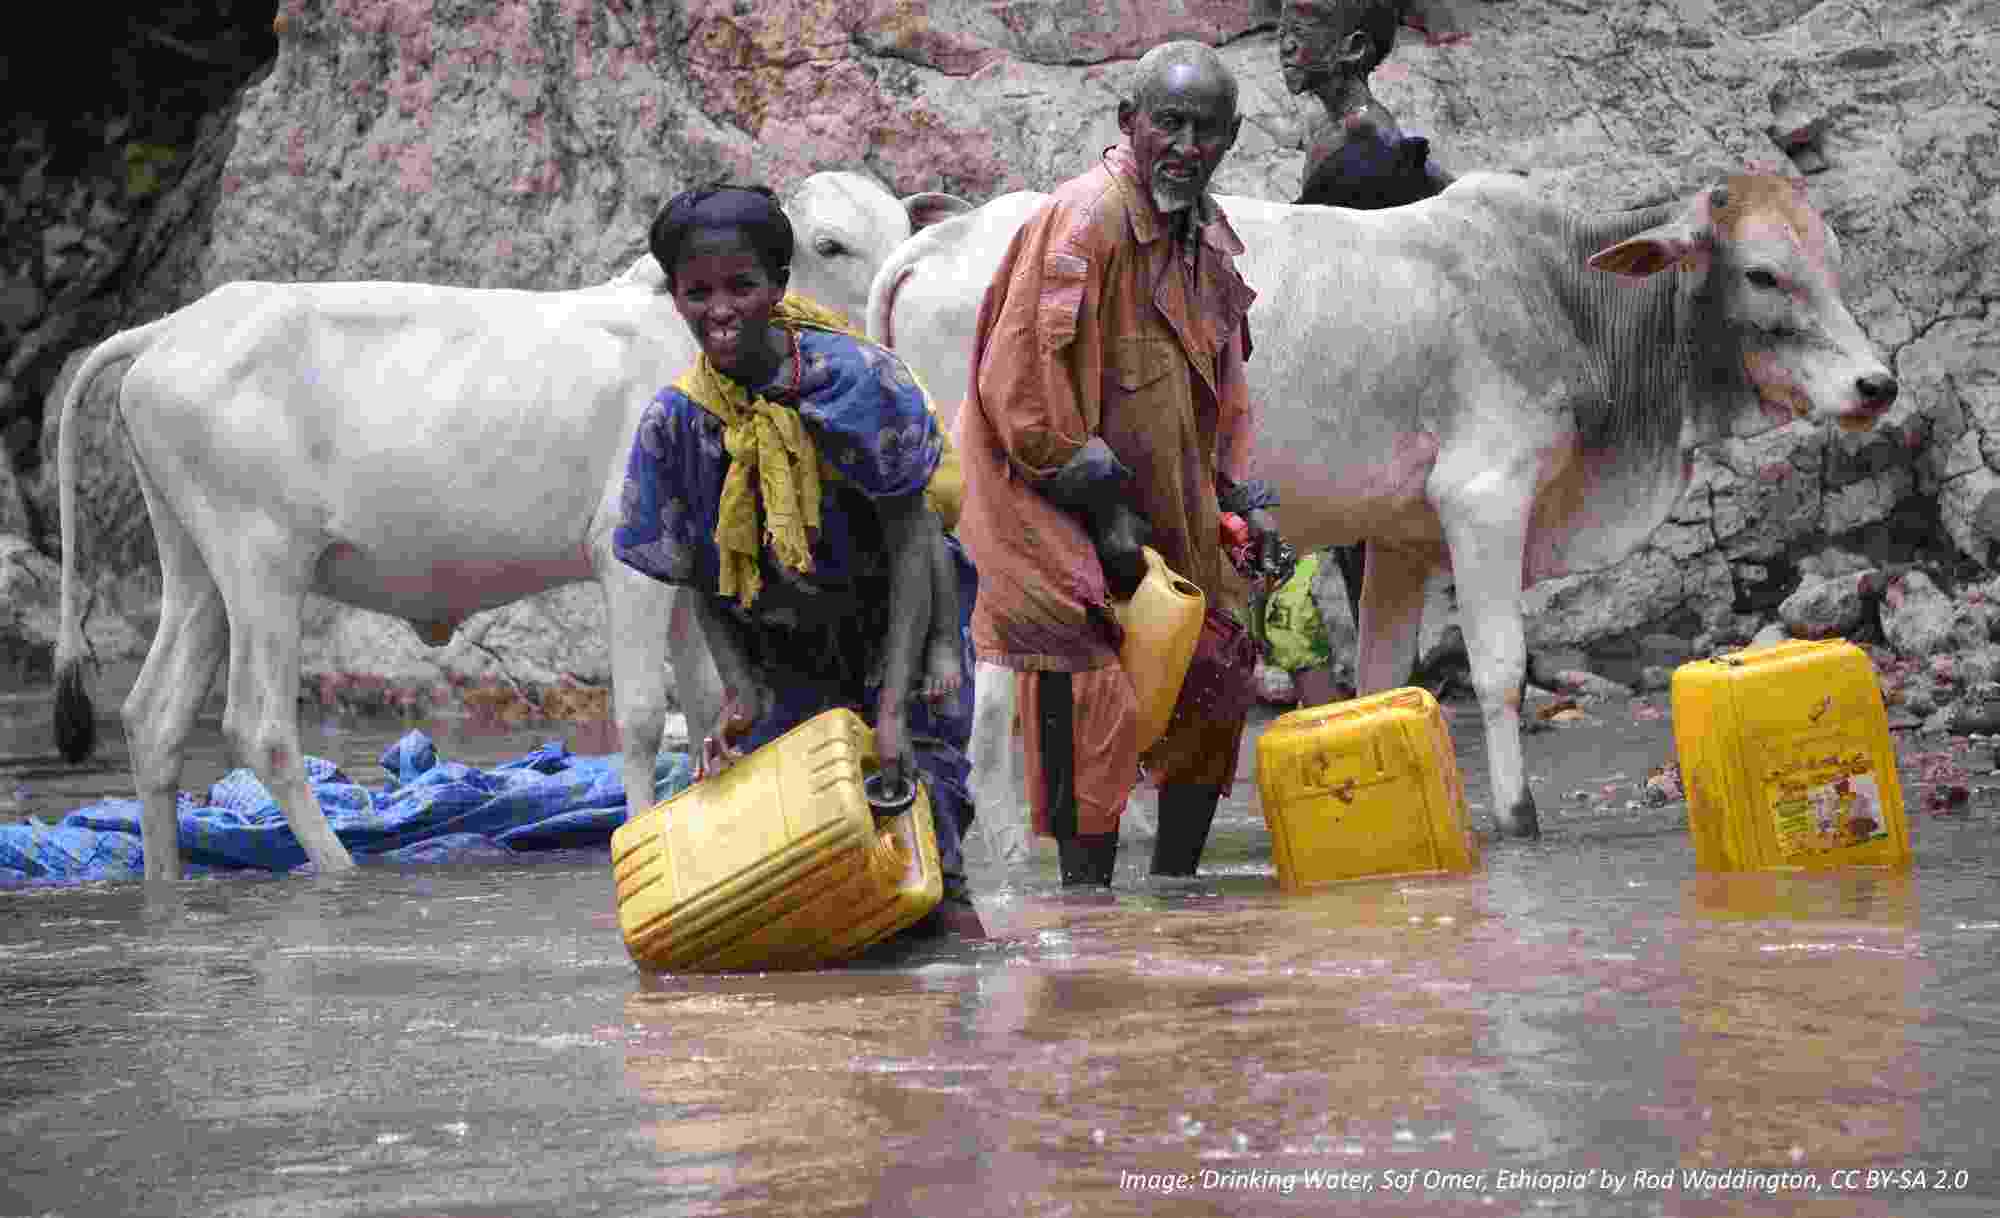 Two people stand in murky river water up to their shins while collecting water using yellow containers, with two white cattle and the rocky riverbank behind